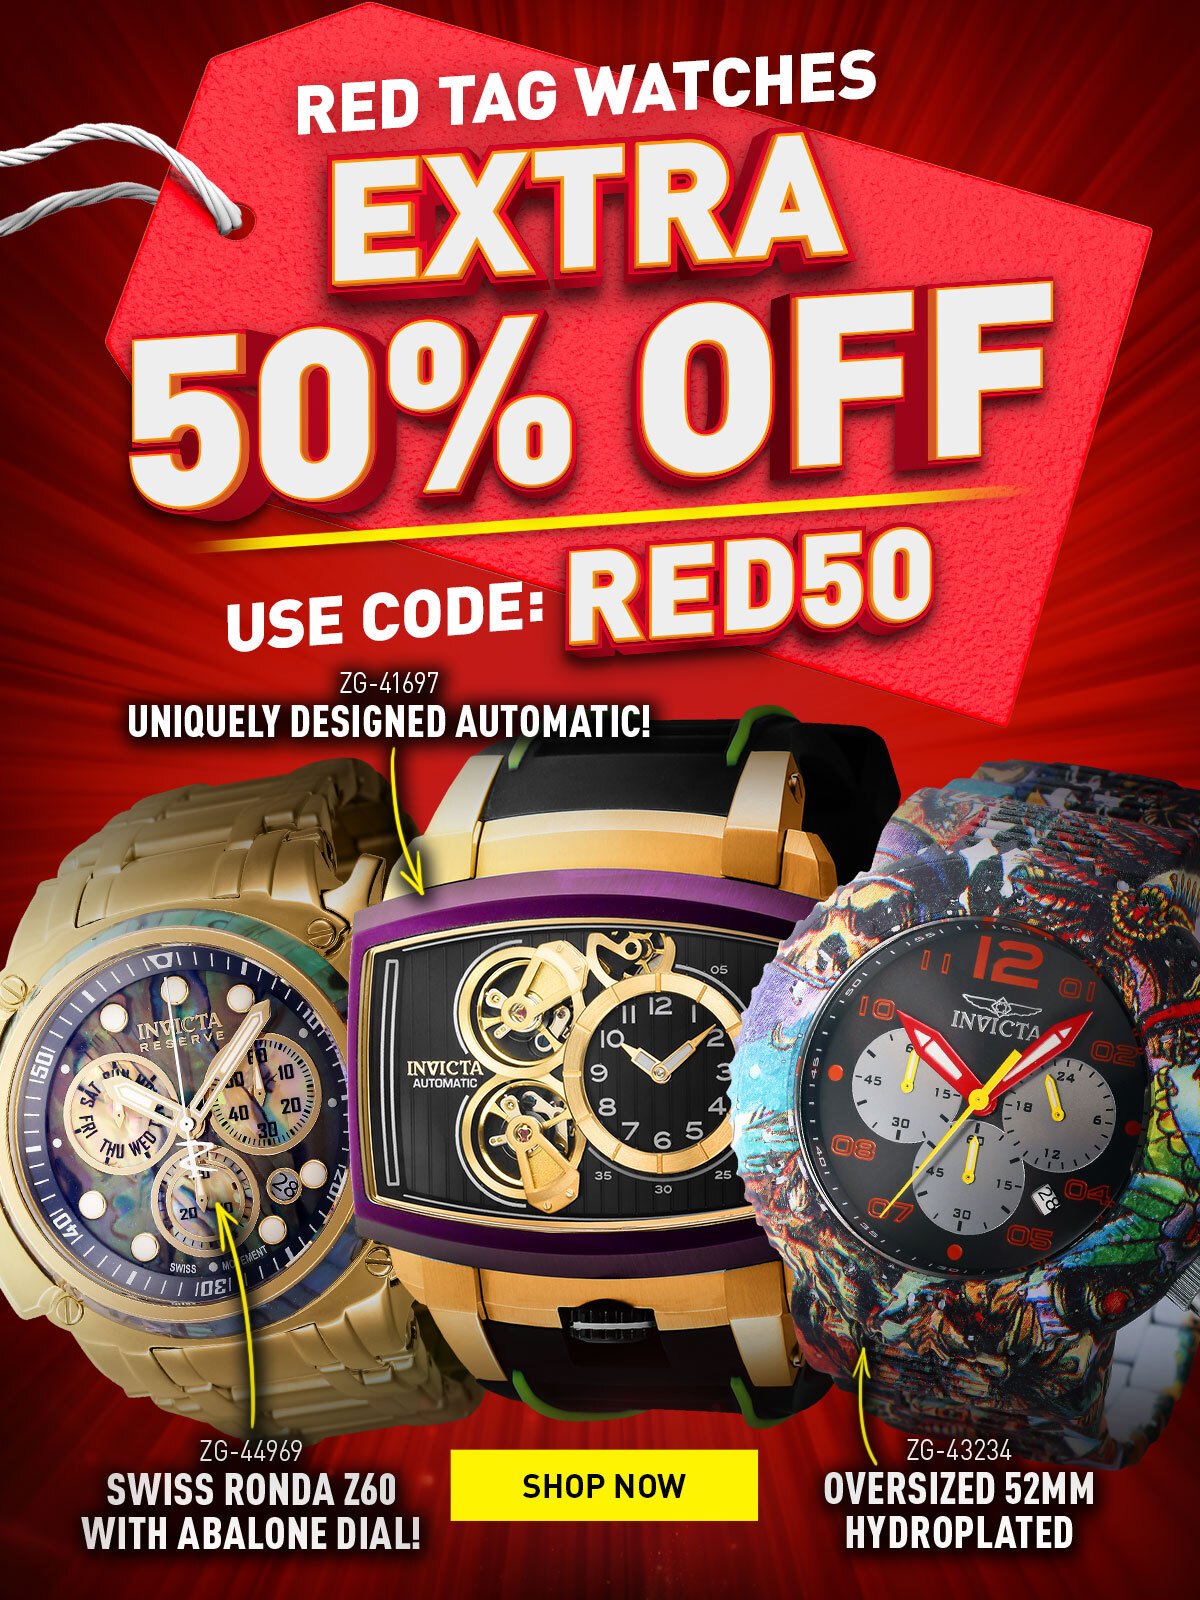 Red tag watches - Extra 50% off